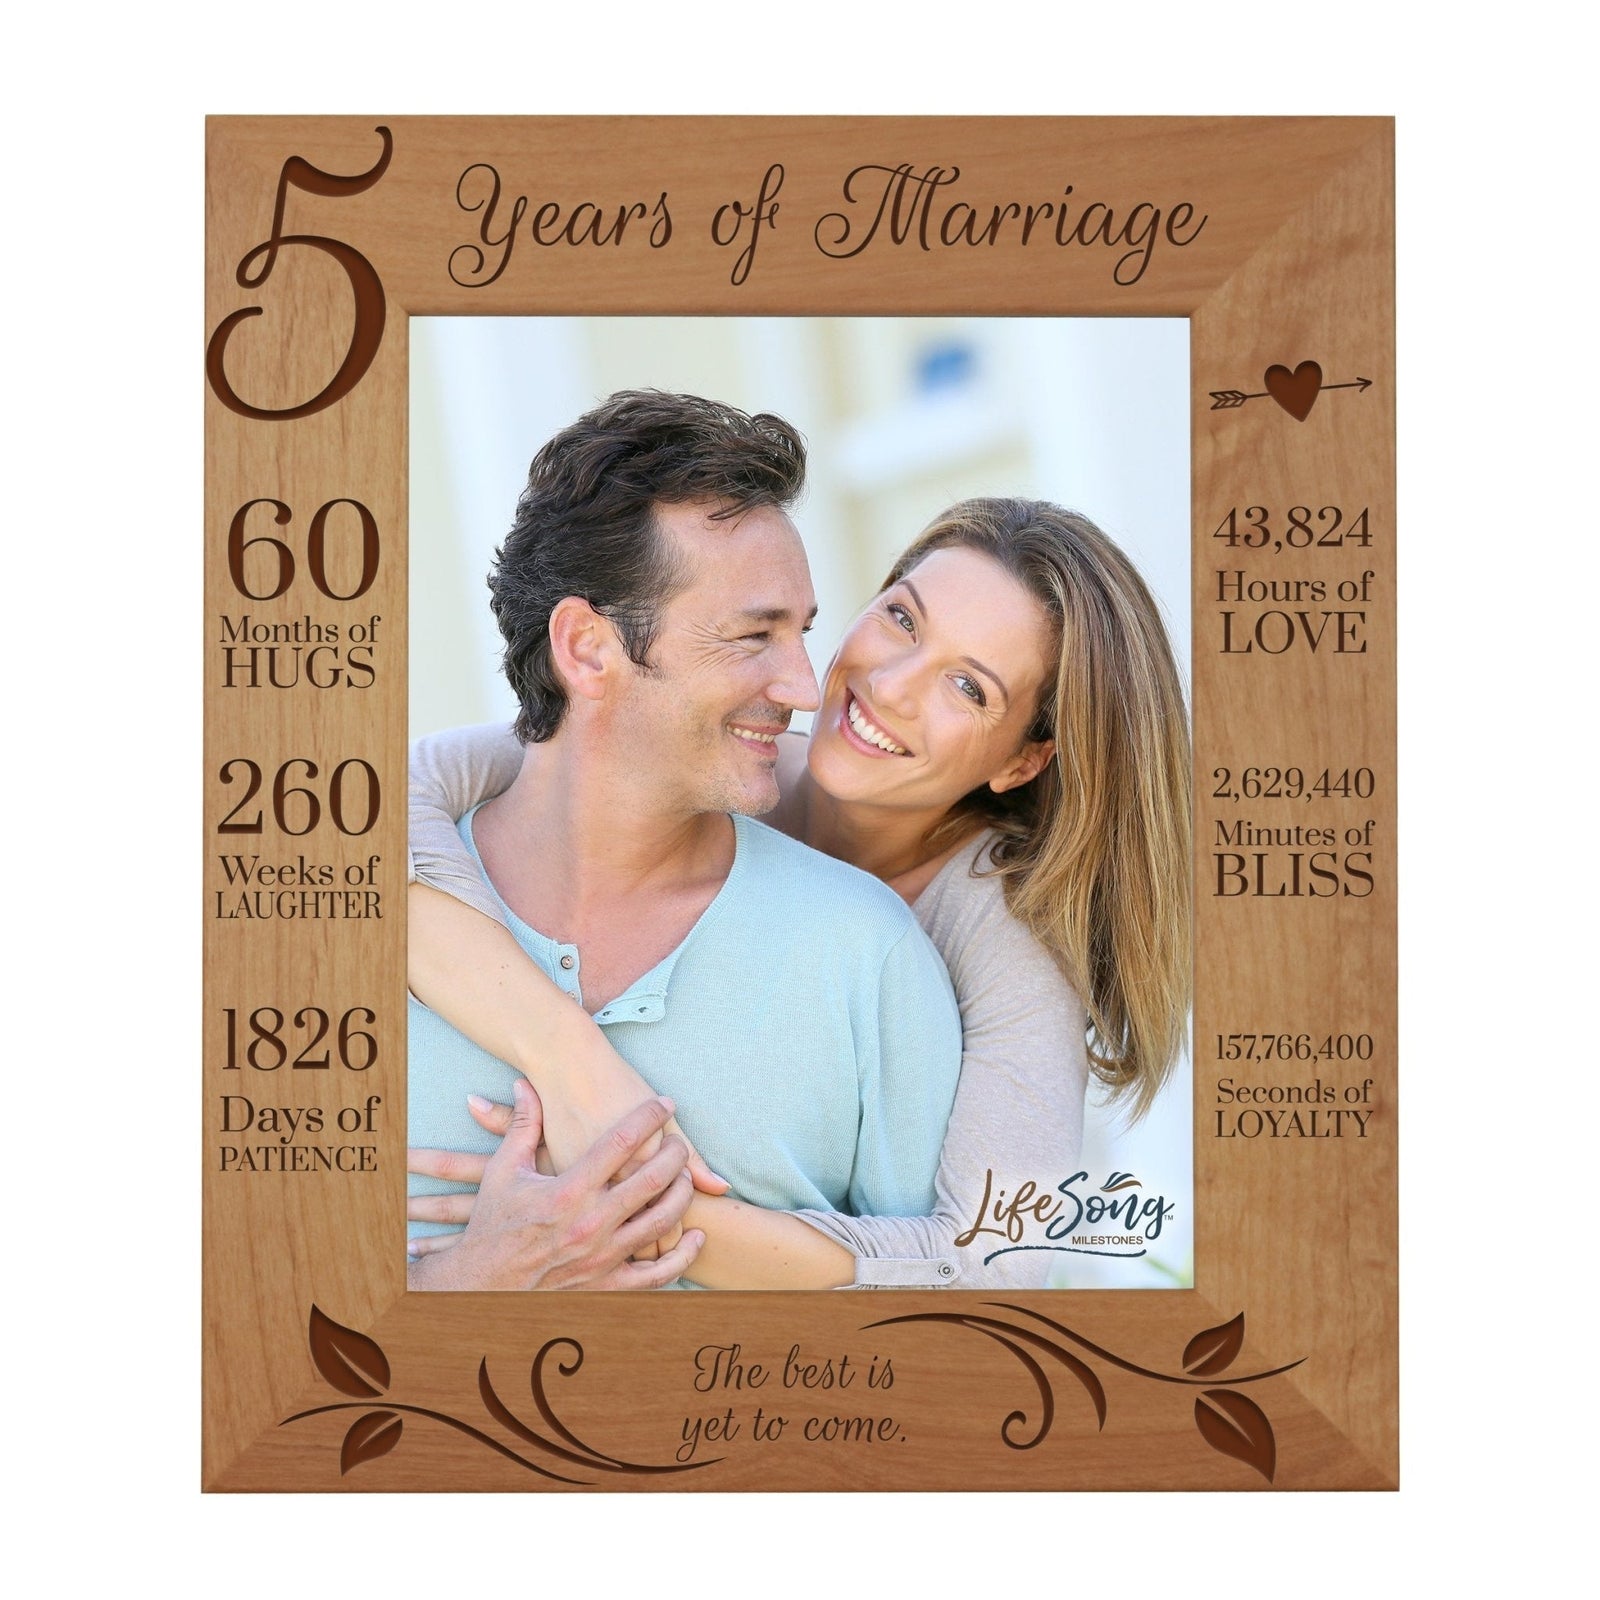 Couples 5th Wedding Anniversary Photo Frame Home Decor Gift Ideas - The Best Is Yet To come - LifeSong Milestones